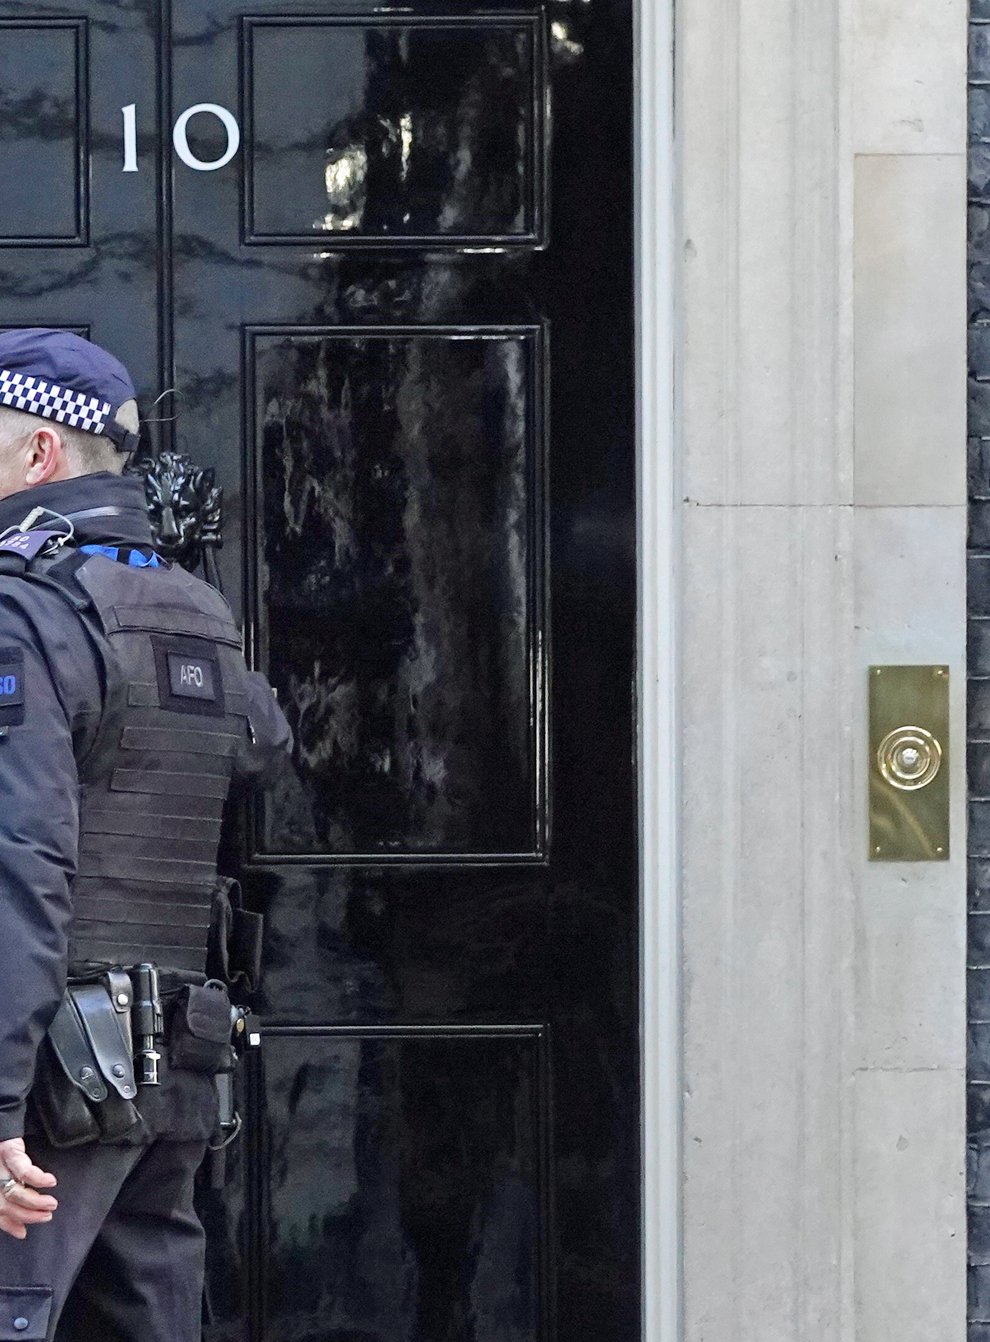 A police officer knocks on the door of the Prime Minister’s official residence in Downing Street, Westminster, London, as public anger continues following the leak on Monday of an email from Boris Johnson’s principal private secretary, Martin Reynolds, inviting 100 Downing Street staff to a “bring your own booze” party in the garden behind No 10 during England’s first lockdown on May 20, 2020. Picture date: Wednesday January 12, 2022. (Stefan Rousseau/PA)